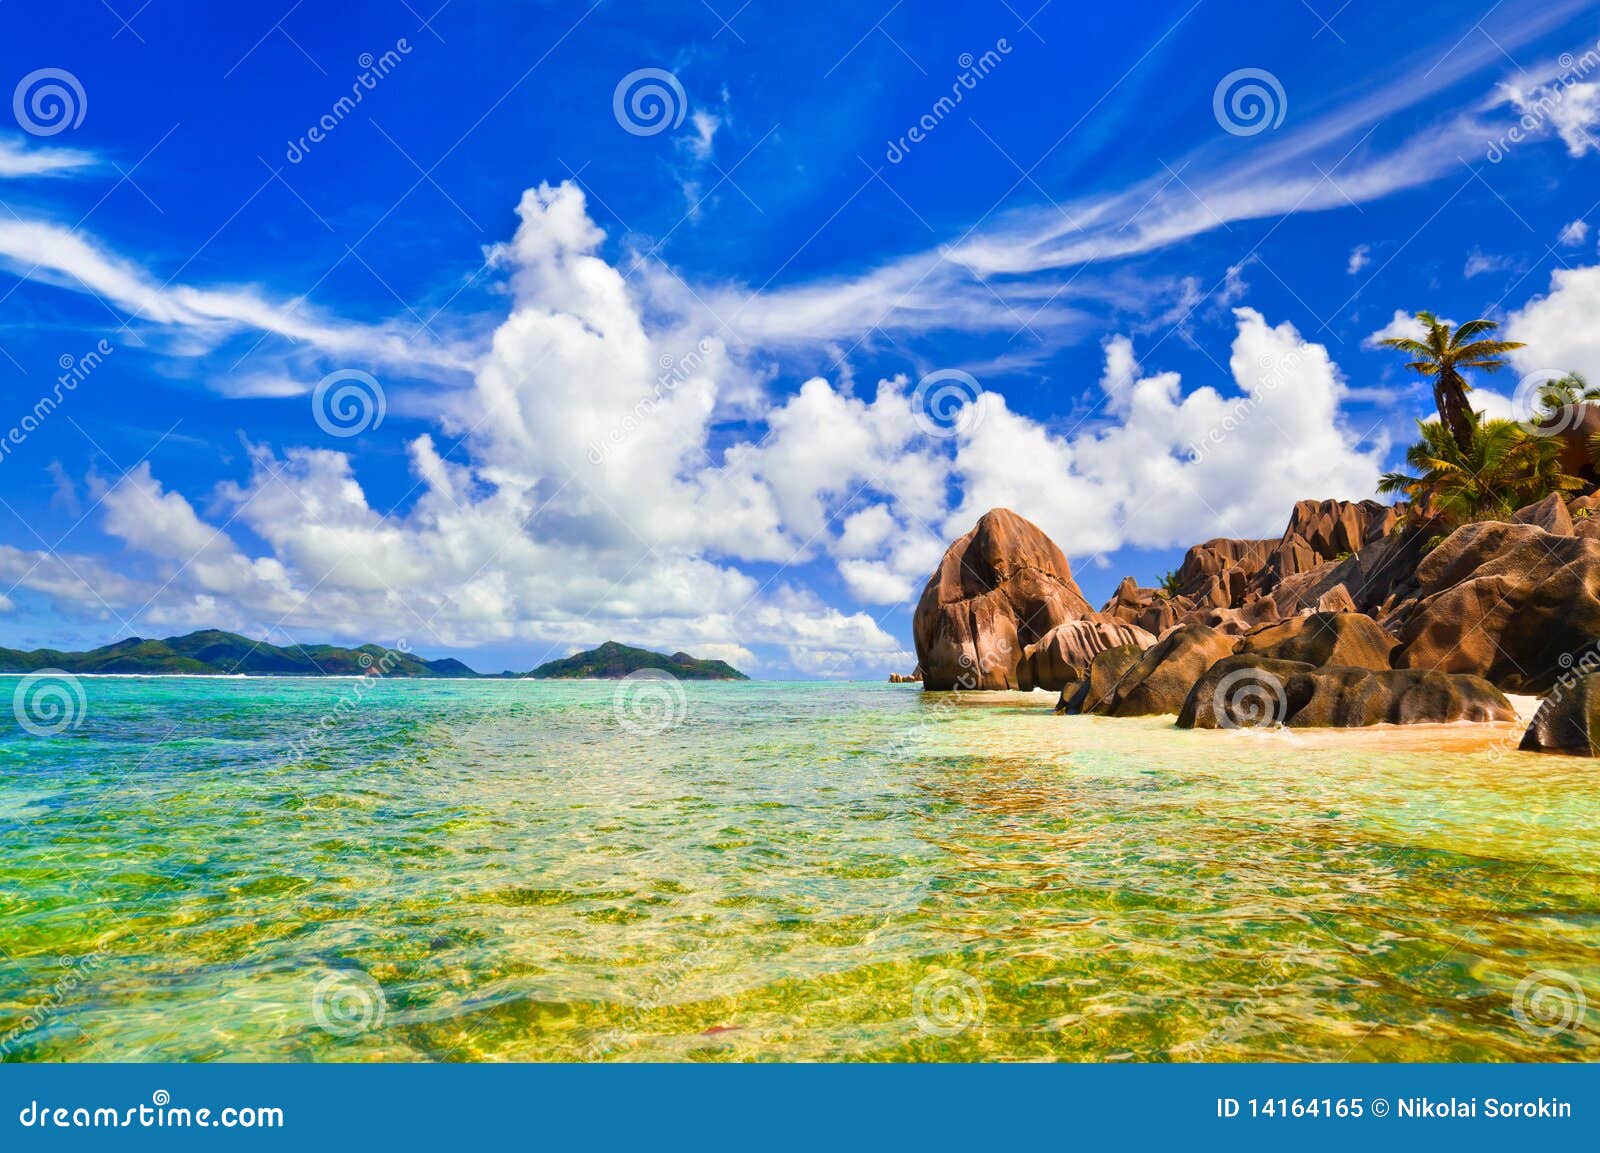 Beach Source D Argent at Seychelles Stock Image - Image of leaf, ocean ...